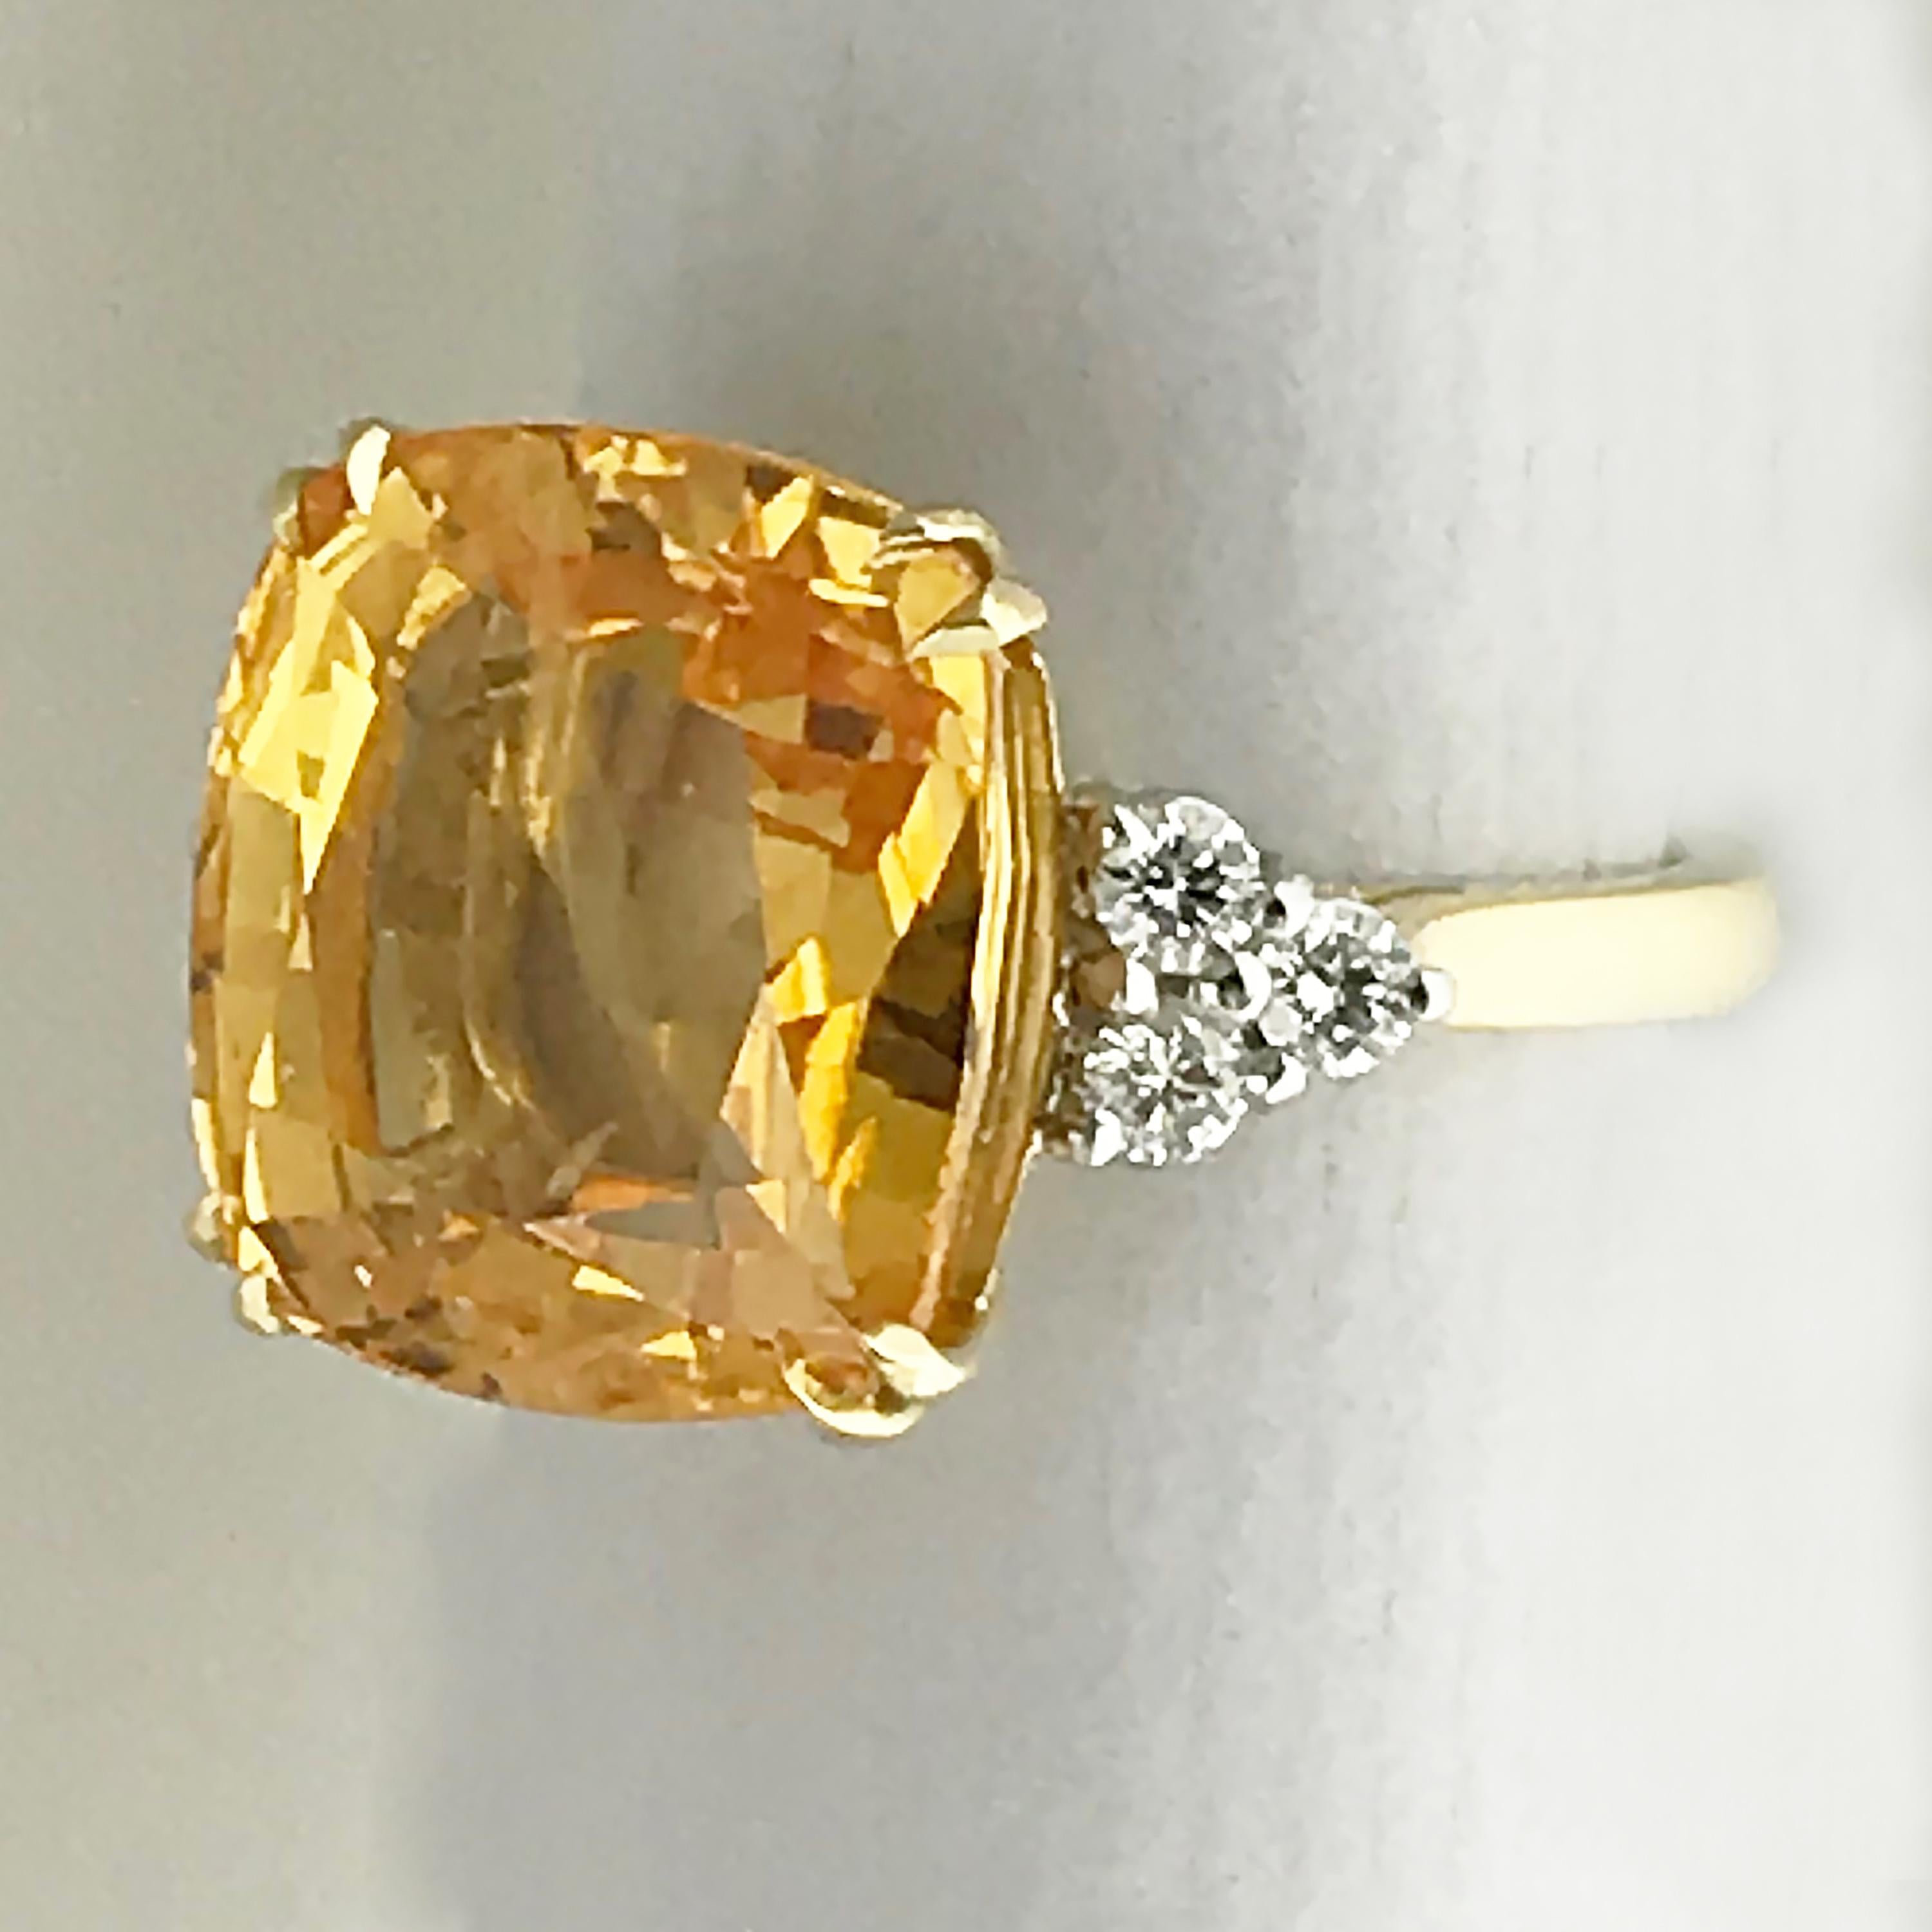 A rare natural colour, untreated, 13.55 carat cushion shape orange sapphire and diamond ring.

18ct yellow gold ring with three round brilliant diamonds on each shoulder G/H, Vs1-SI1, total weight approx 0.5ct.

Accompanied by GRS Gemresearch